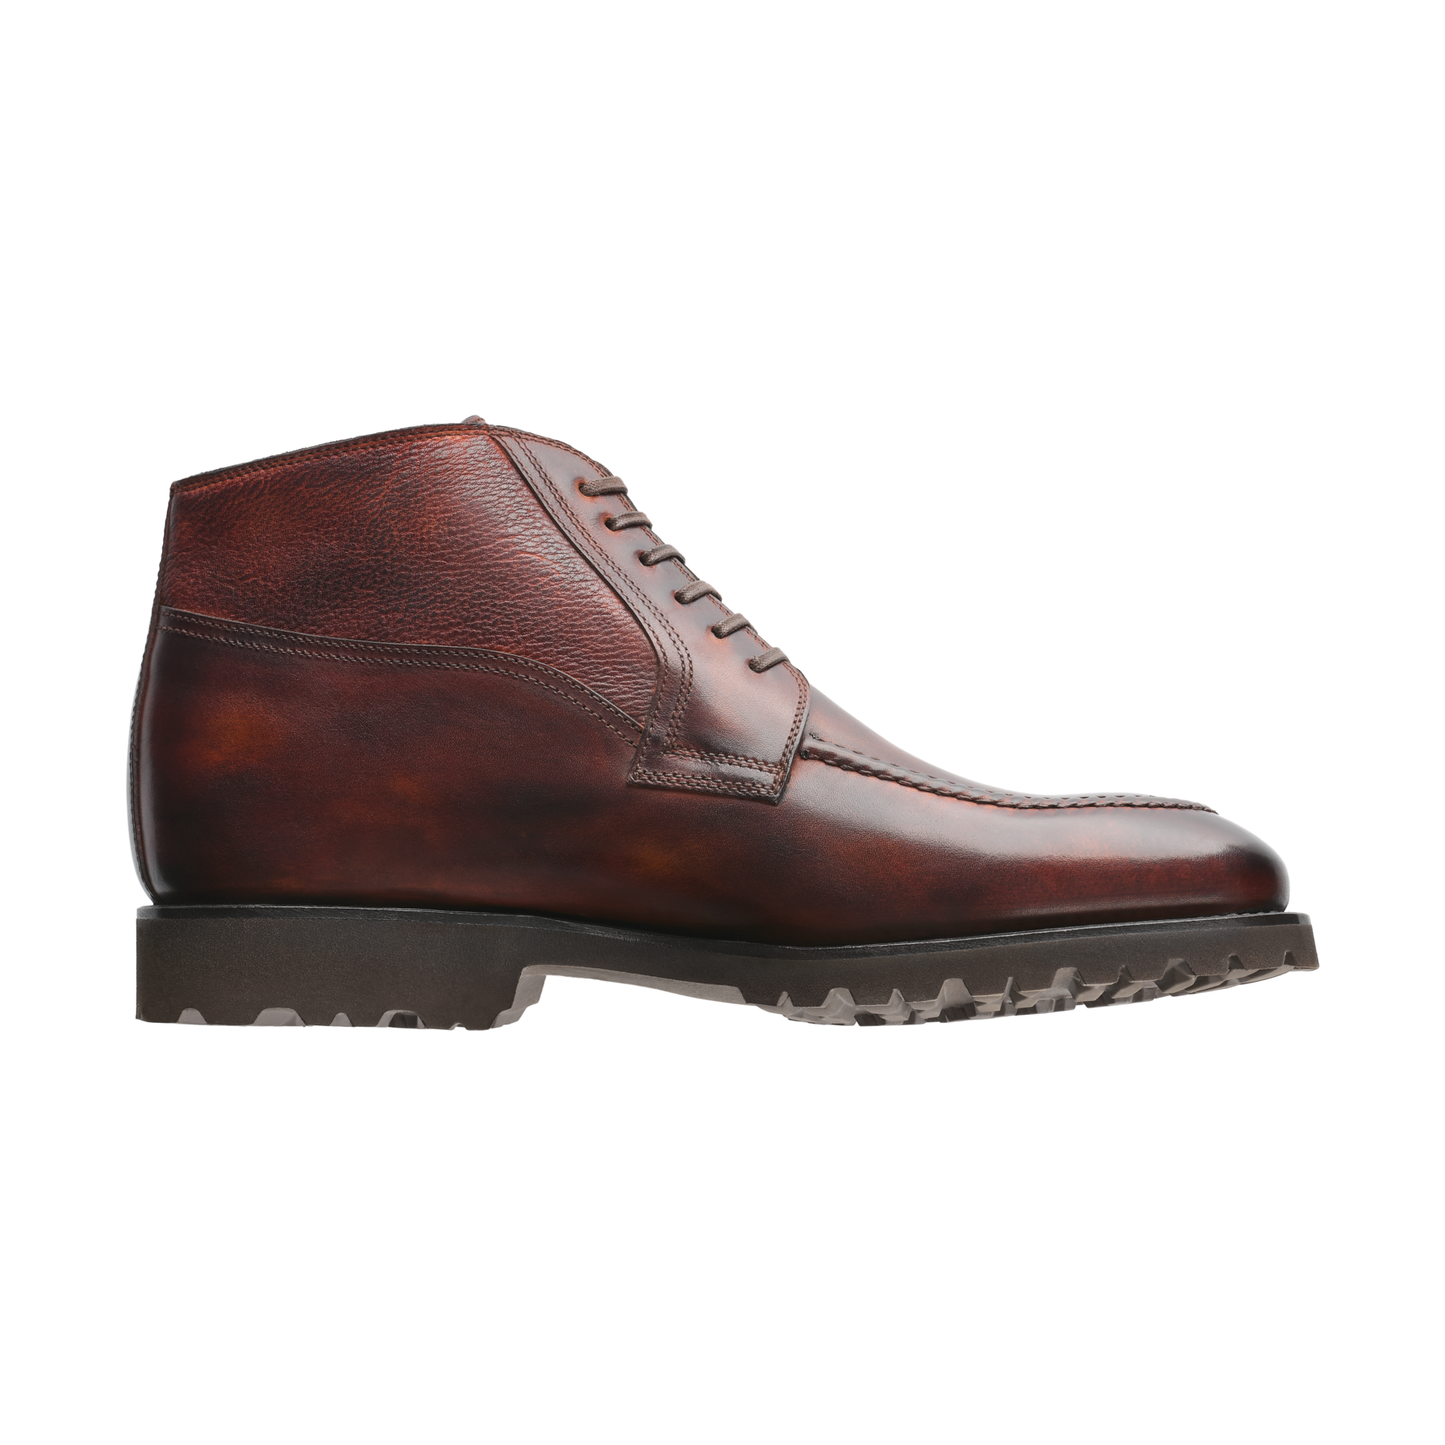 Bontoni «Campagna» Six-Eyelet Leather Derby Boots with Hand-Stitched Details in Whisky Brown - SARTALE